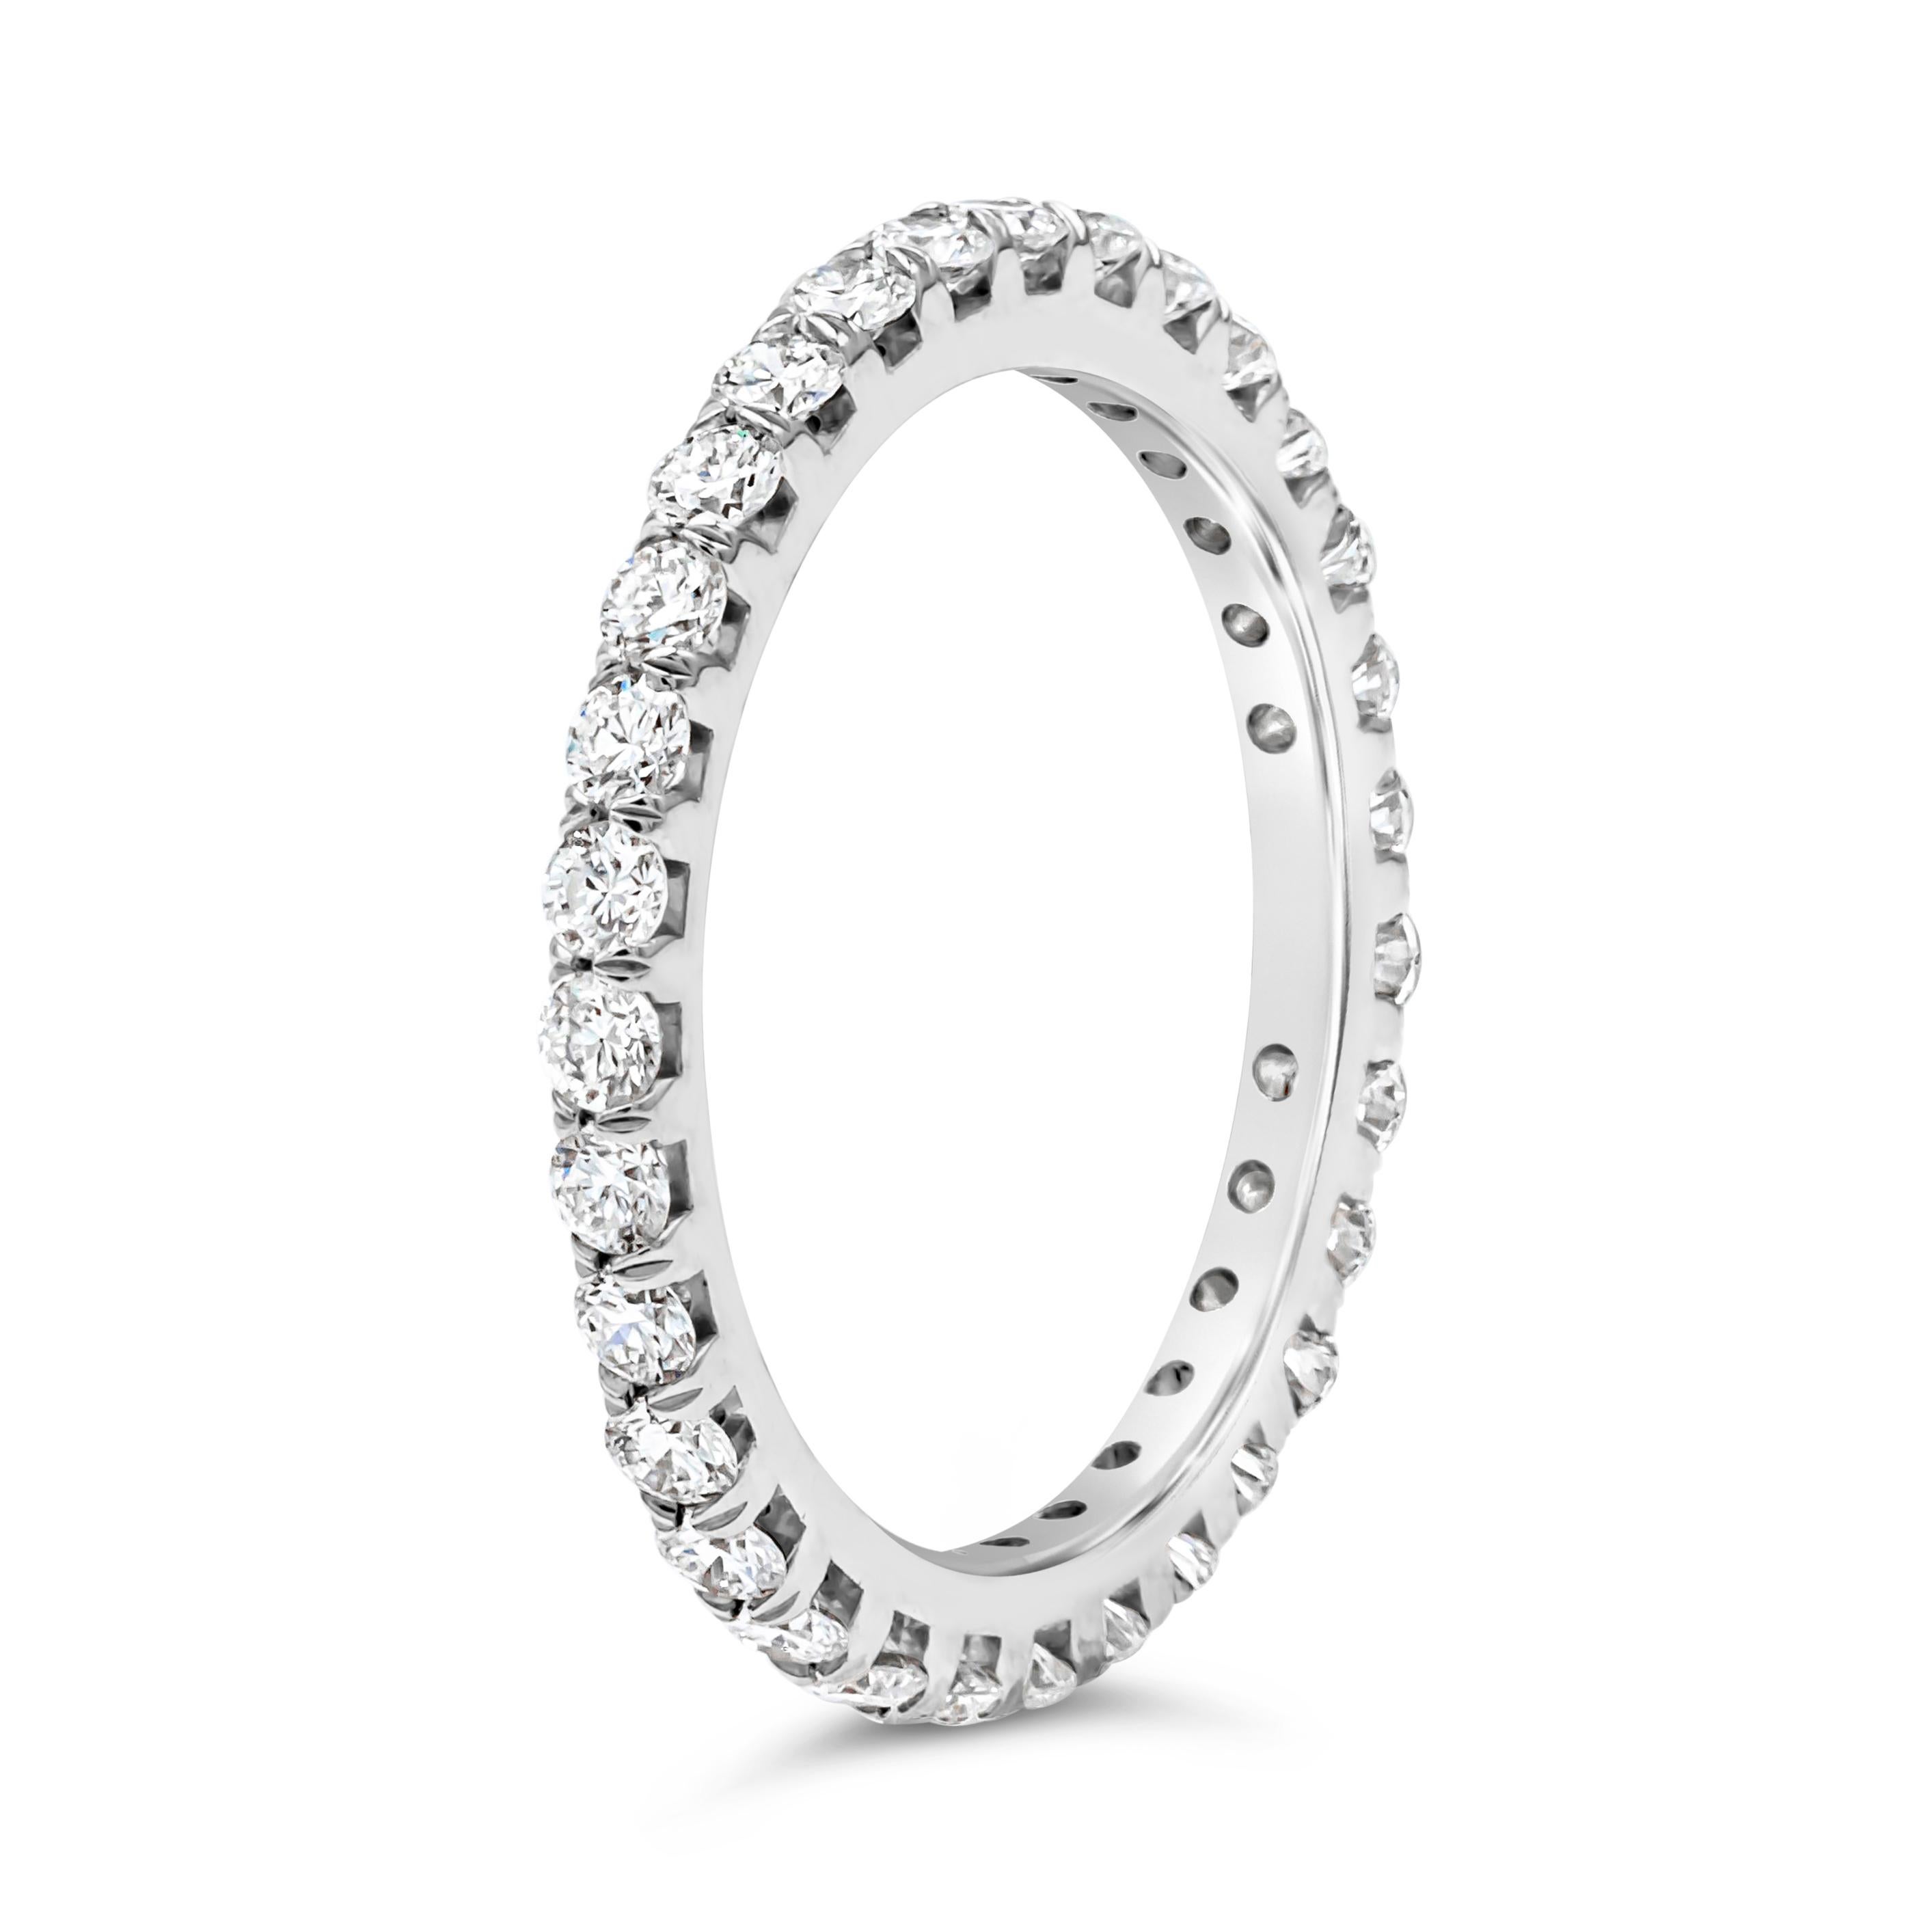 A classy and simple eternity wedding band showcasing a line of 31 brilliant round cut diamonds weighing 0.99 carats total, G color and VS in clarity, set in a four prong basket setting and French pave set. Finely made in platinum. Size 6.5 US